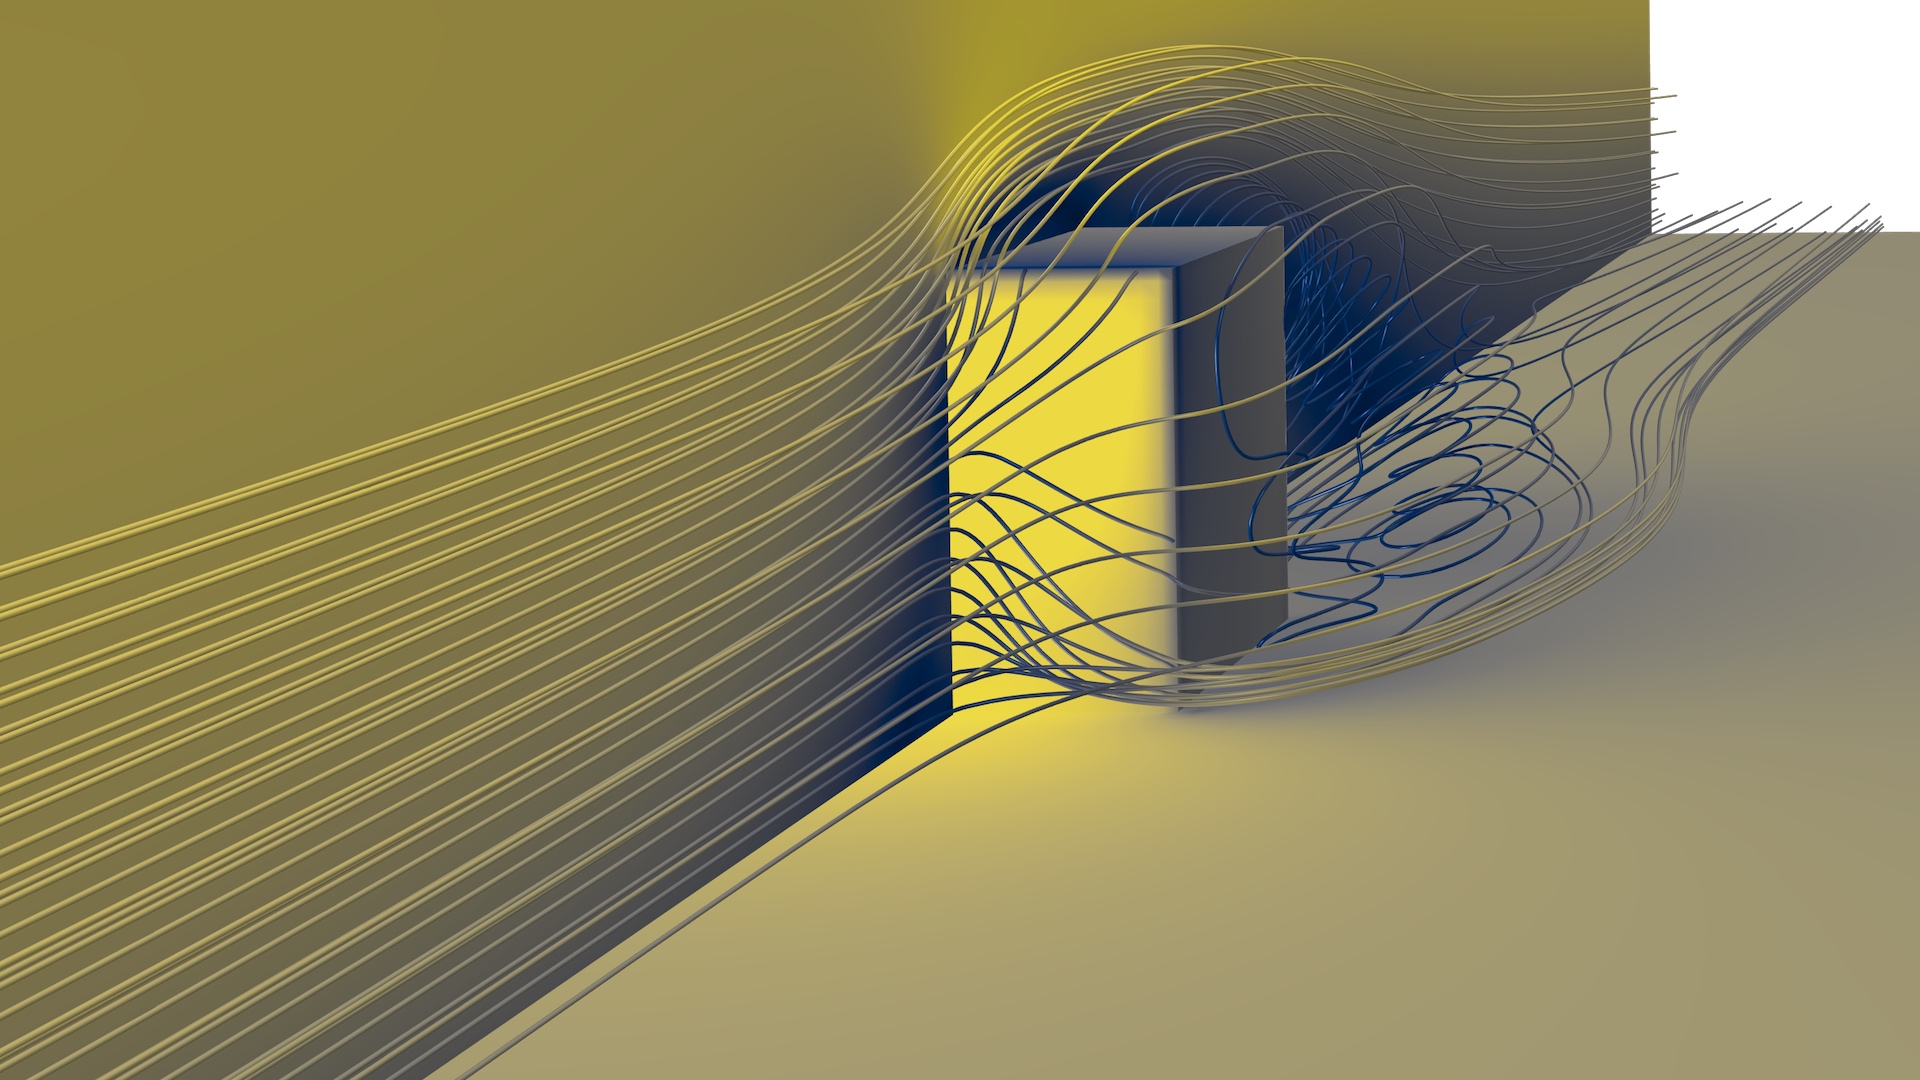 A new RANS turbulence model, in the CFD Module, gives you the ability to model realizable turbulent flow. This image also shows the new Cividis color table.